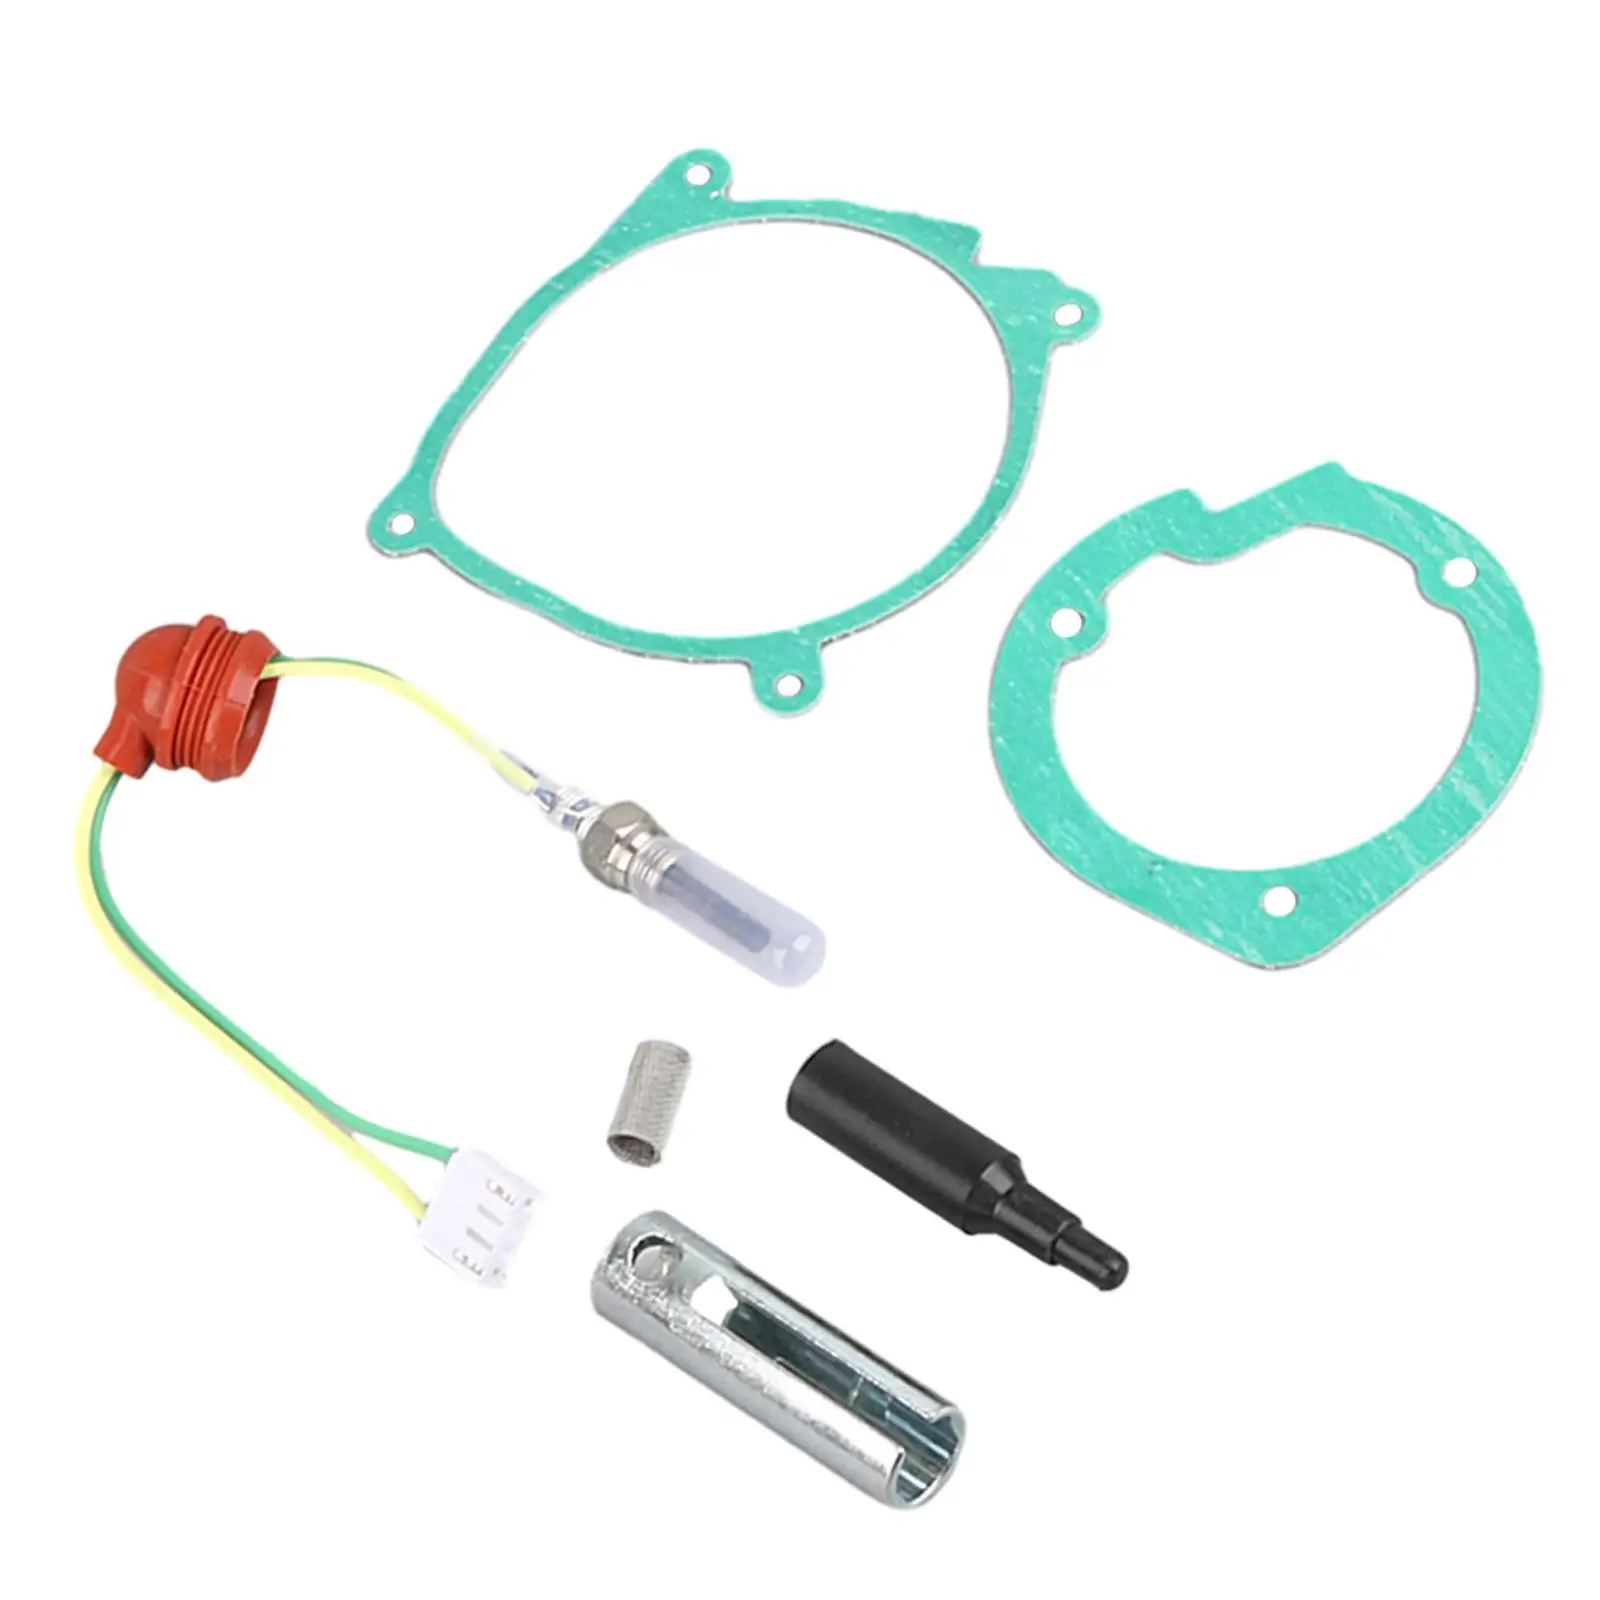 12V Glow Plug Repair Set 5kW with Gaskets Easy to Install Car Air Parking Heater Service Set Replacement Universal